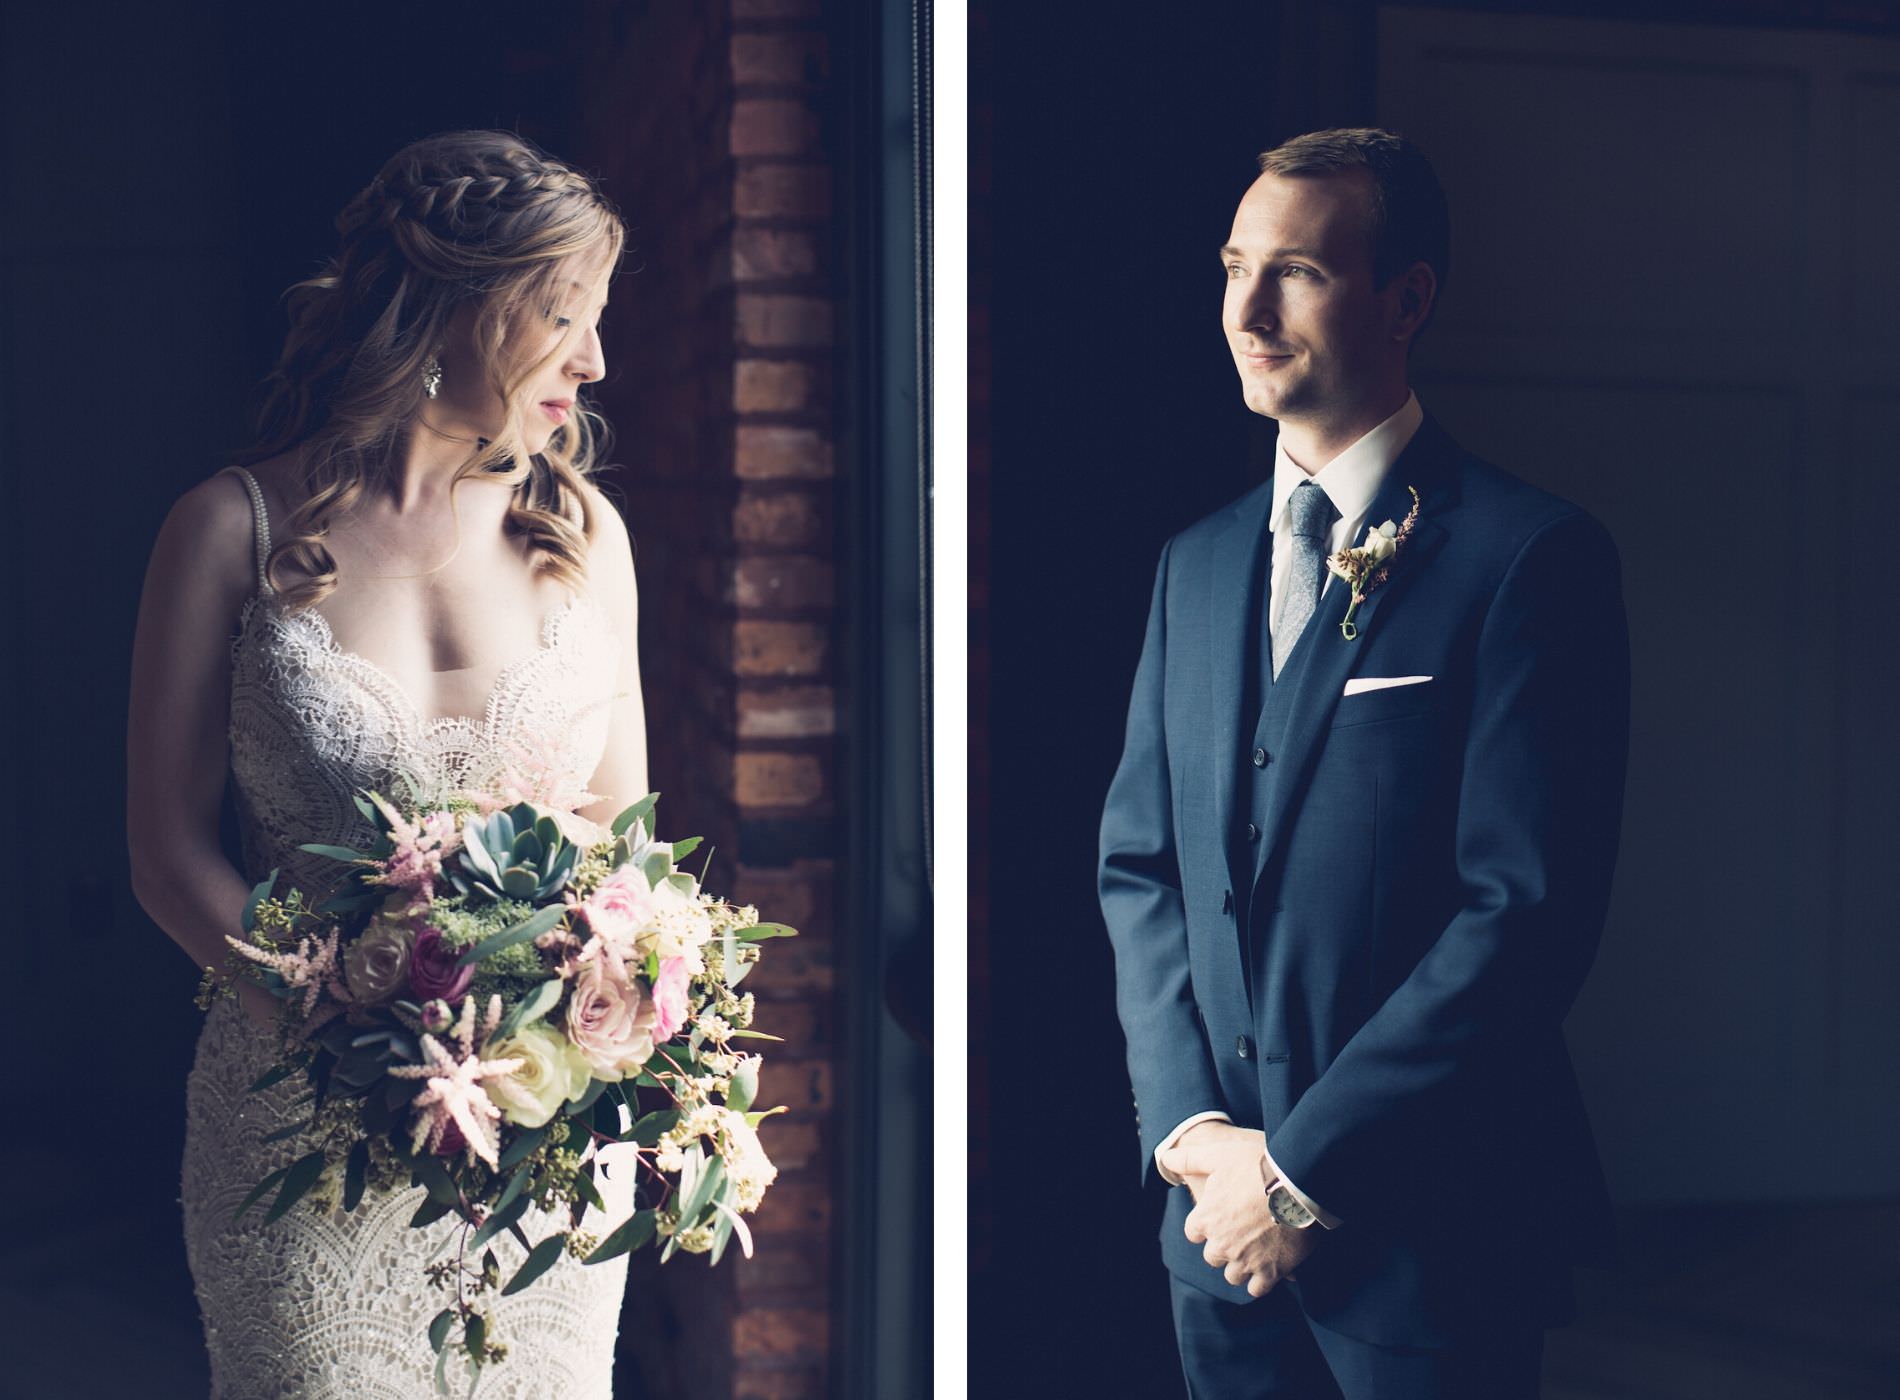 Bridal and Groom Portrait | Groom Wearing Classic Navy Suit | Bridal Wedding Bouquet with Dusty Rose Astilbe and Pink Ranunculus with White Roses and Succulents and Eucalyptus Greenery | Tampa Wedding Photographer Luxe Light Images | Tampa Wedding Hair and Makeup Femme Akoi Beauty Studio